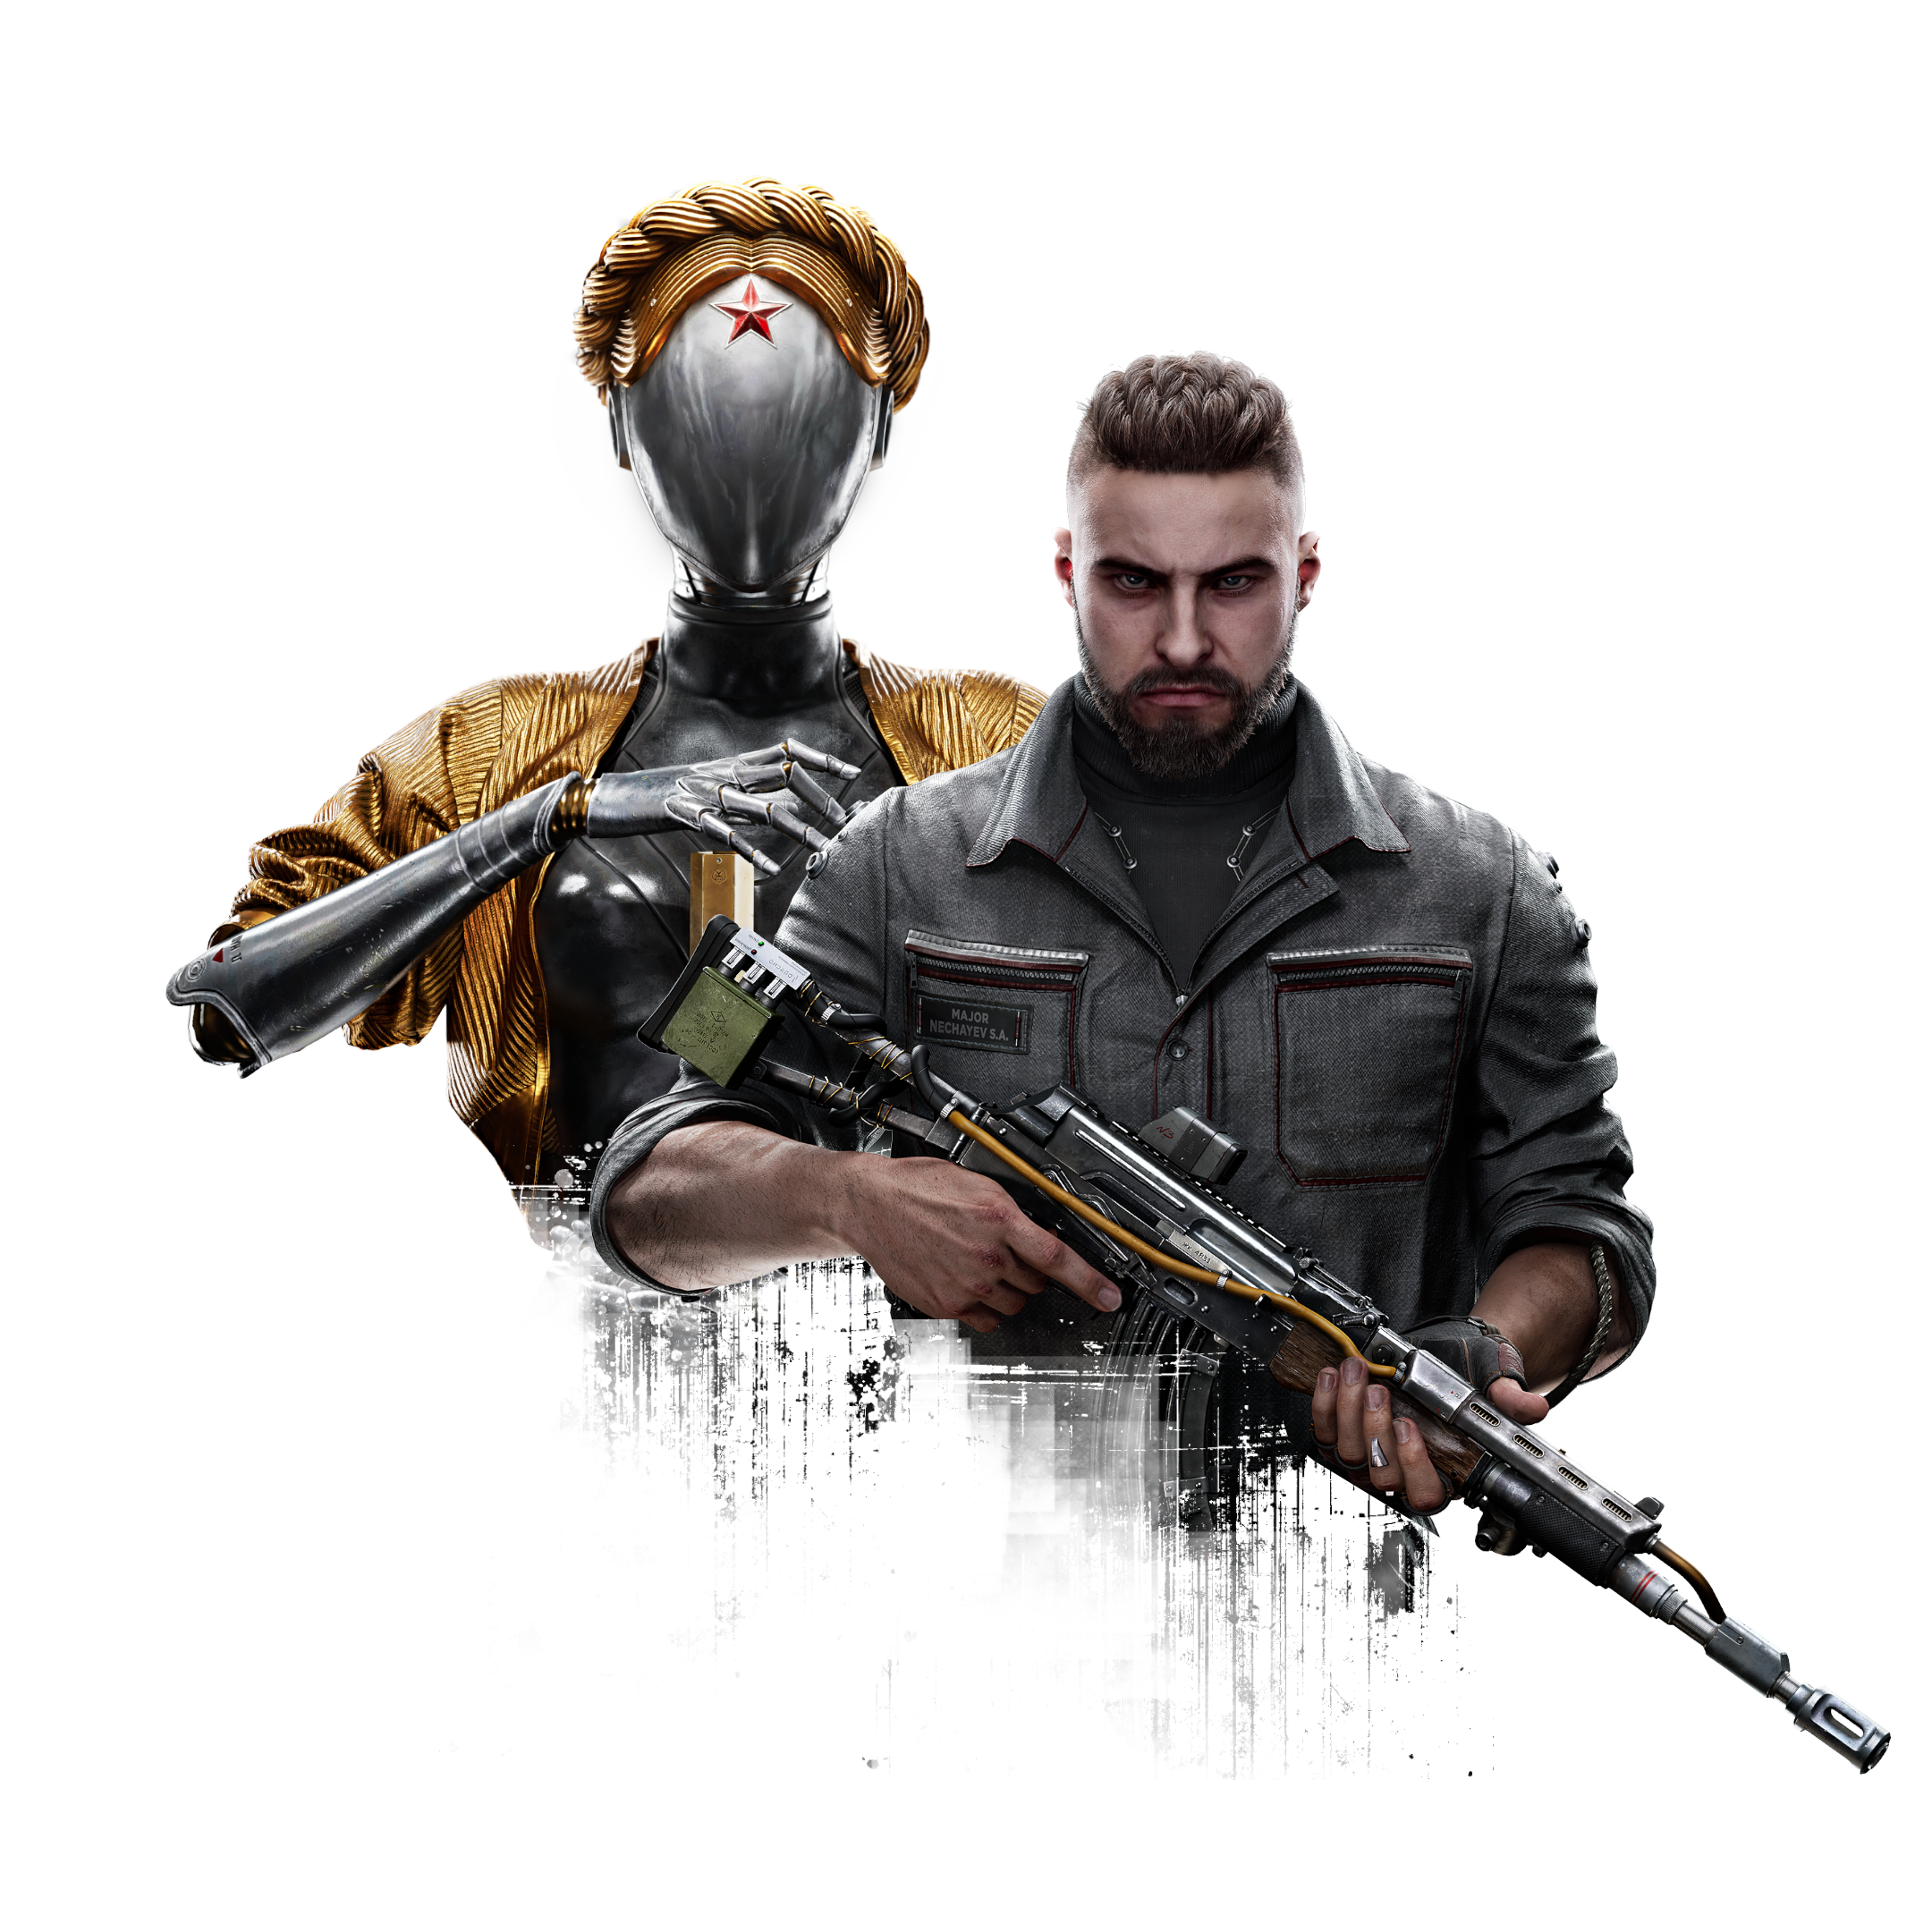 General 2160x2160 Atomic Heart robot PlayStation Xbox PC gaming video games video game characters minimalism simple background The Twins (Atomic Heart)